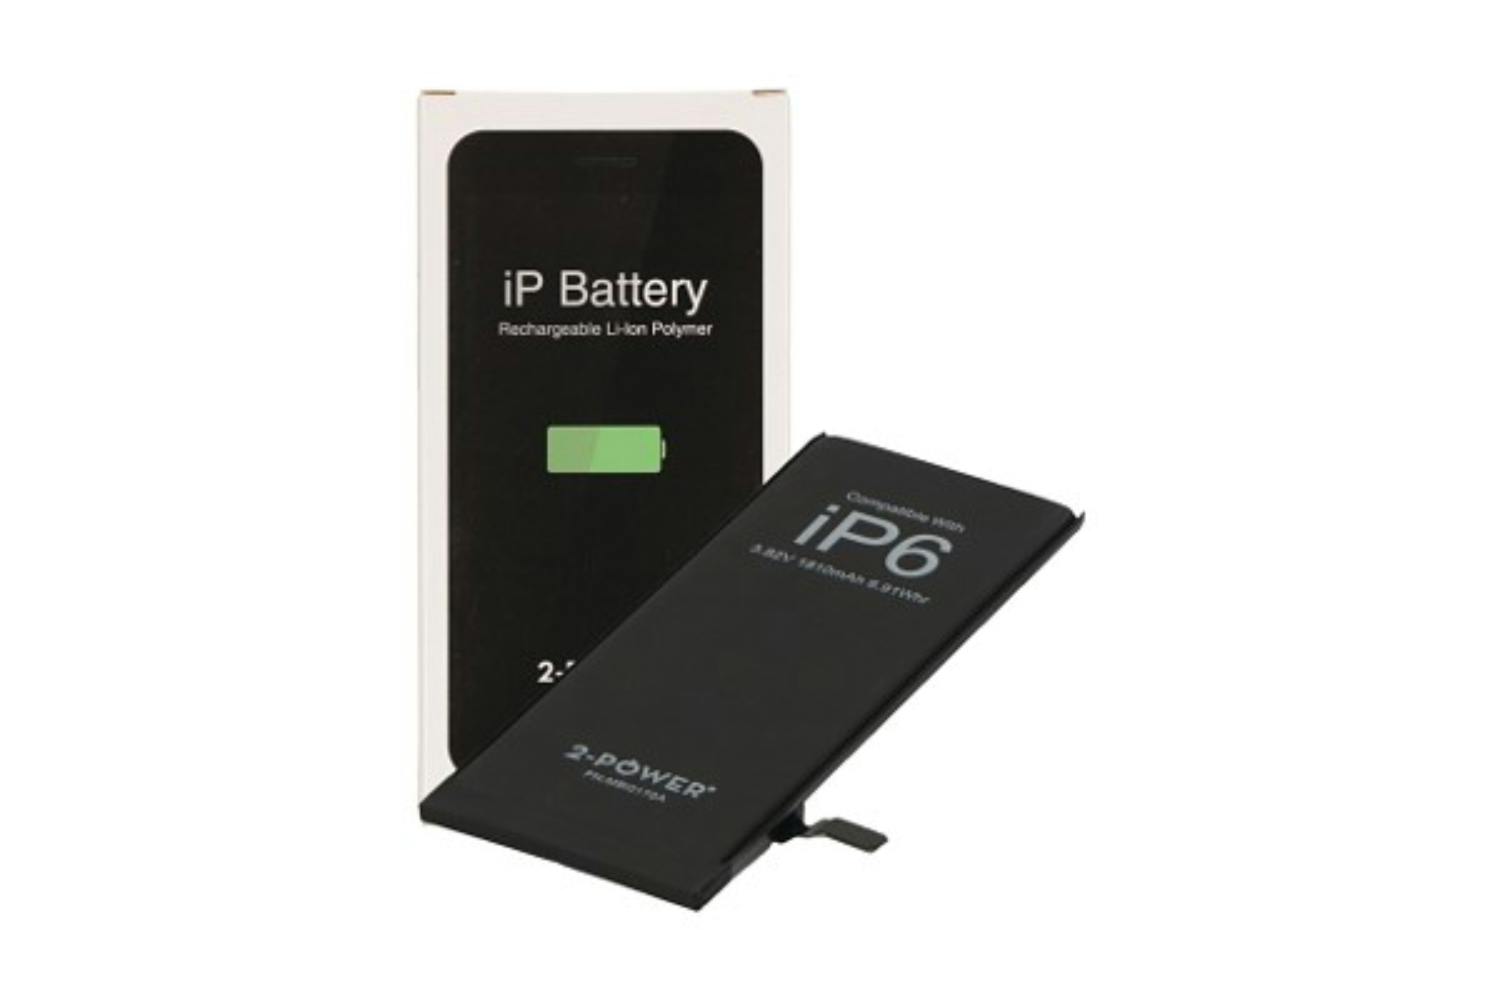 2-Power MBI0172AW 1810mAh Replacement iPhone Battery